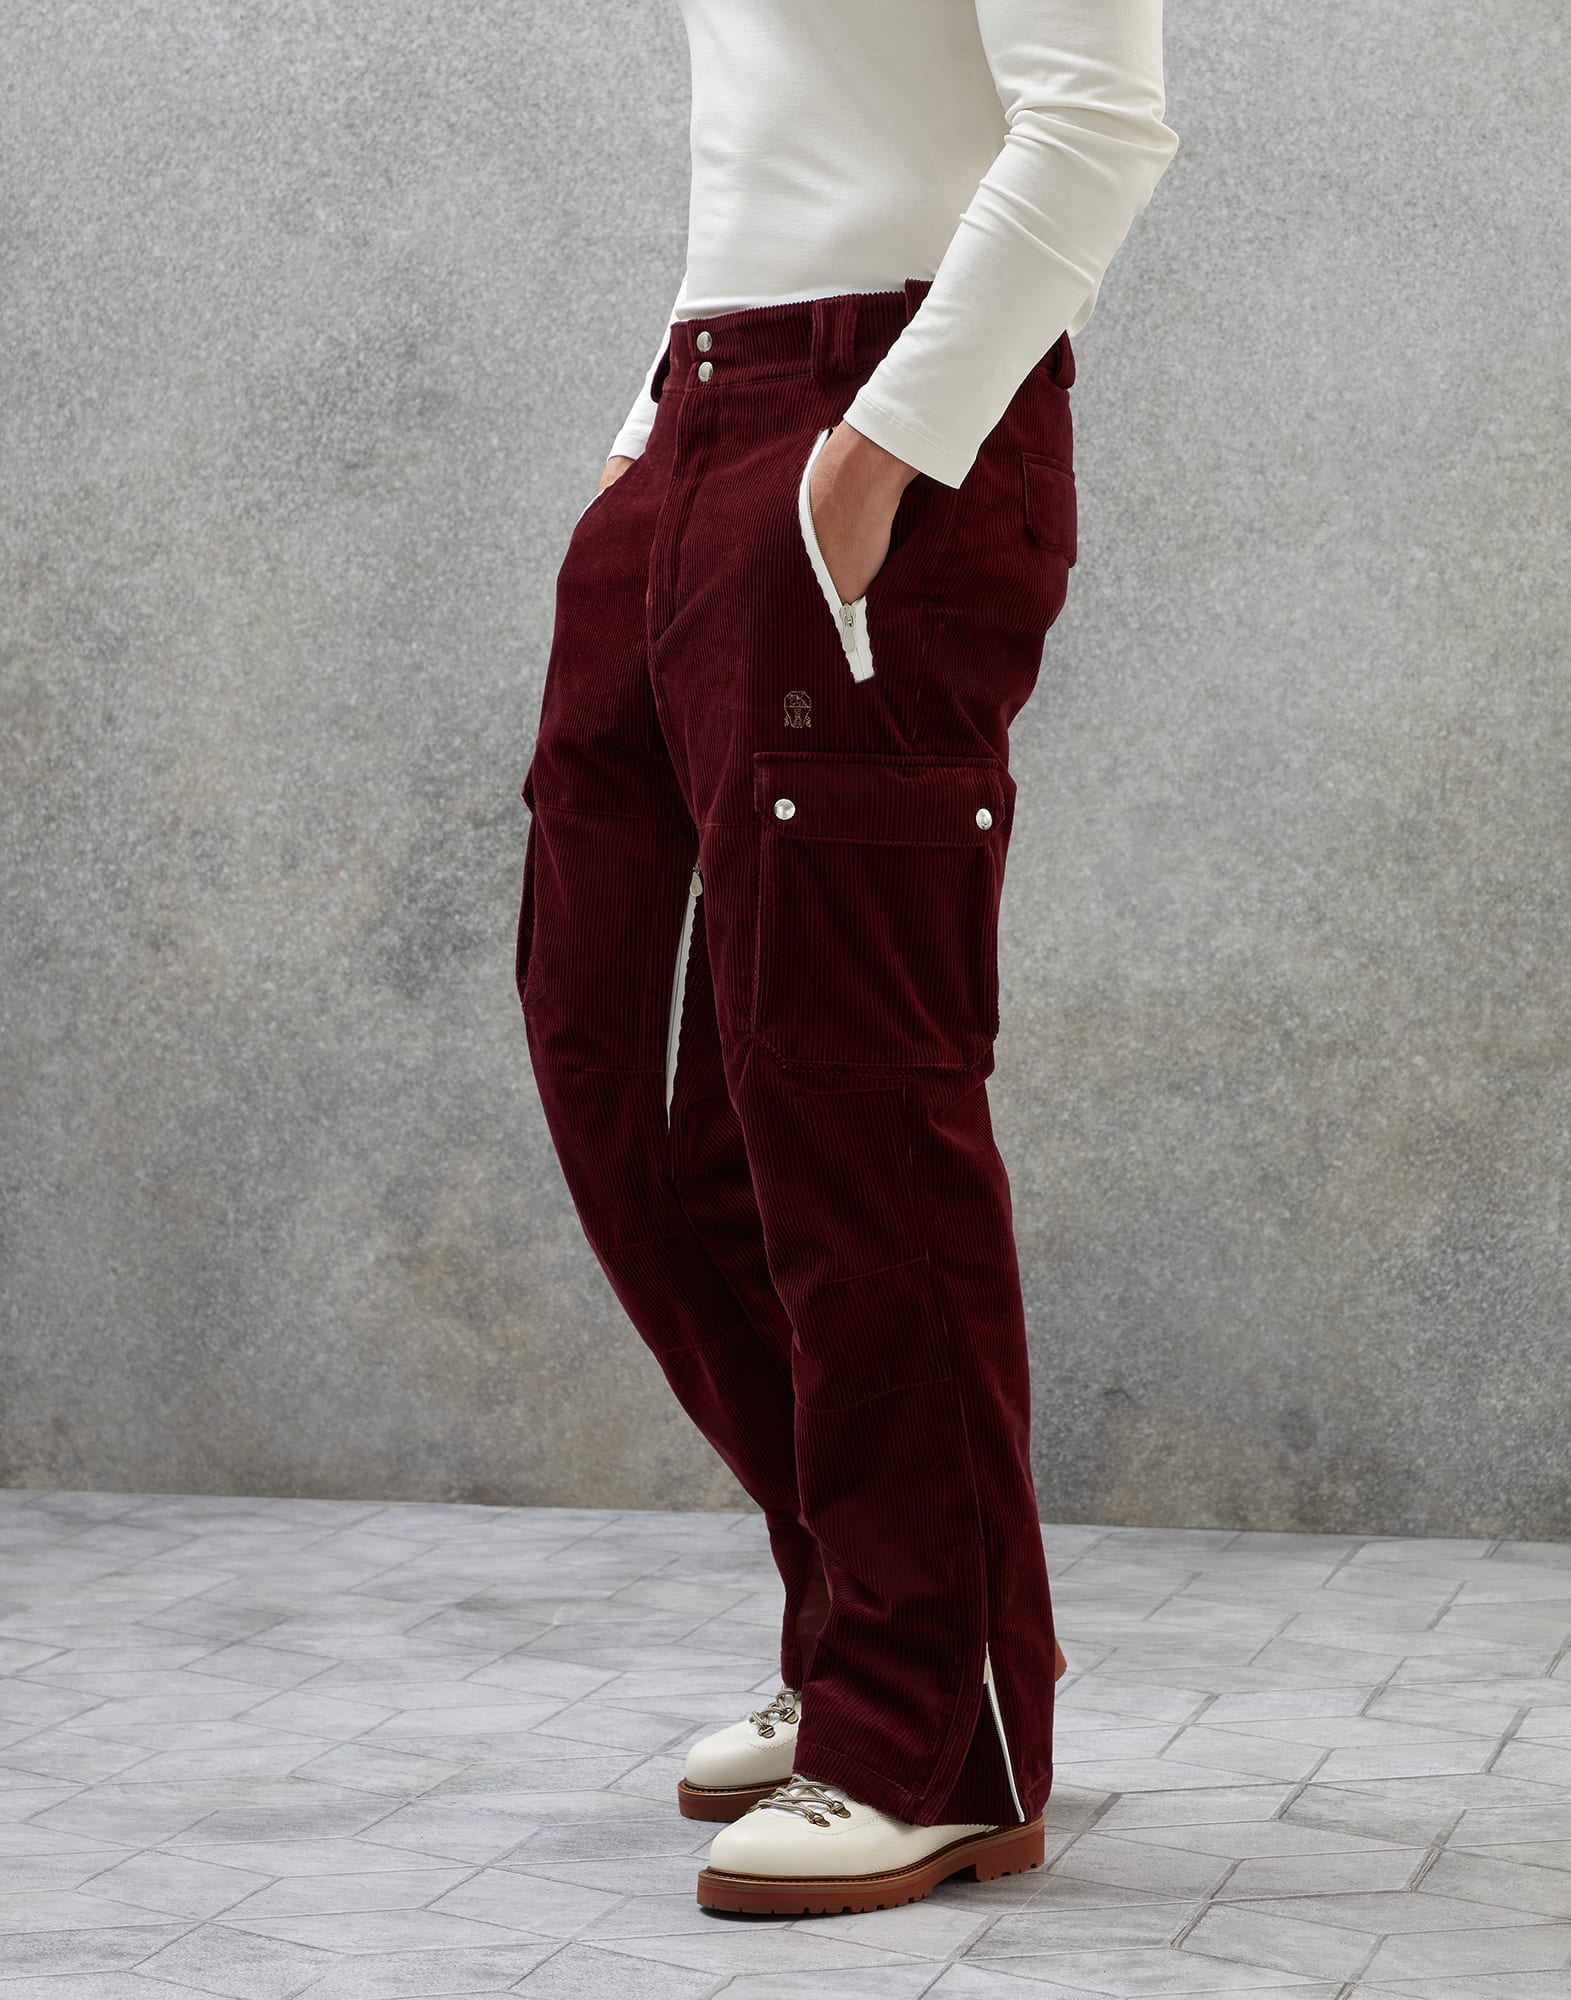 Mountain trousers with padding